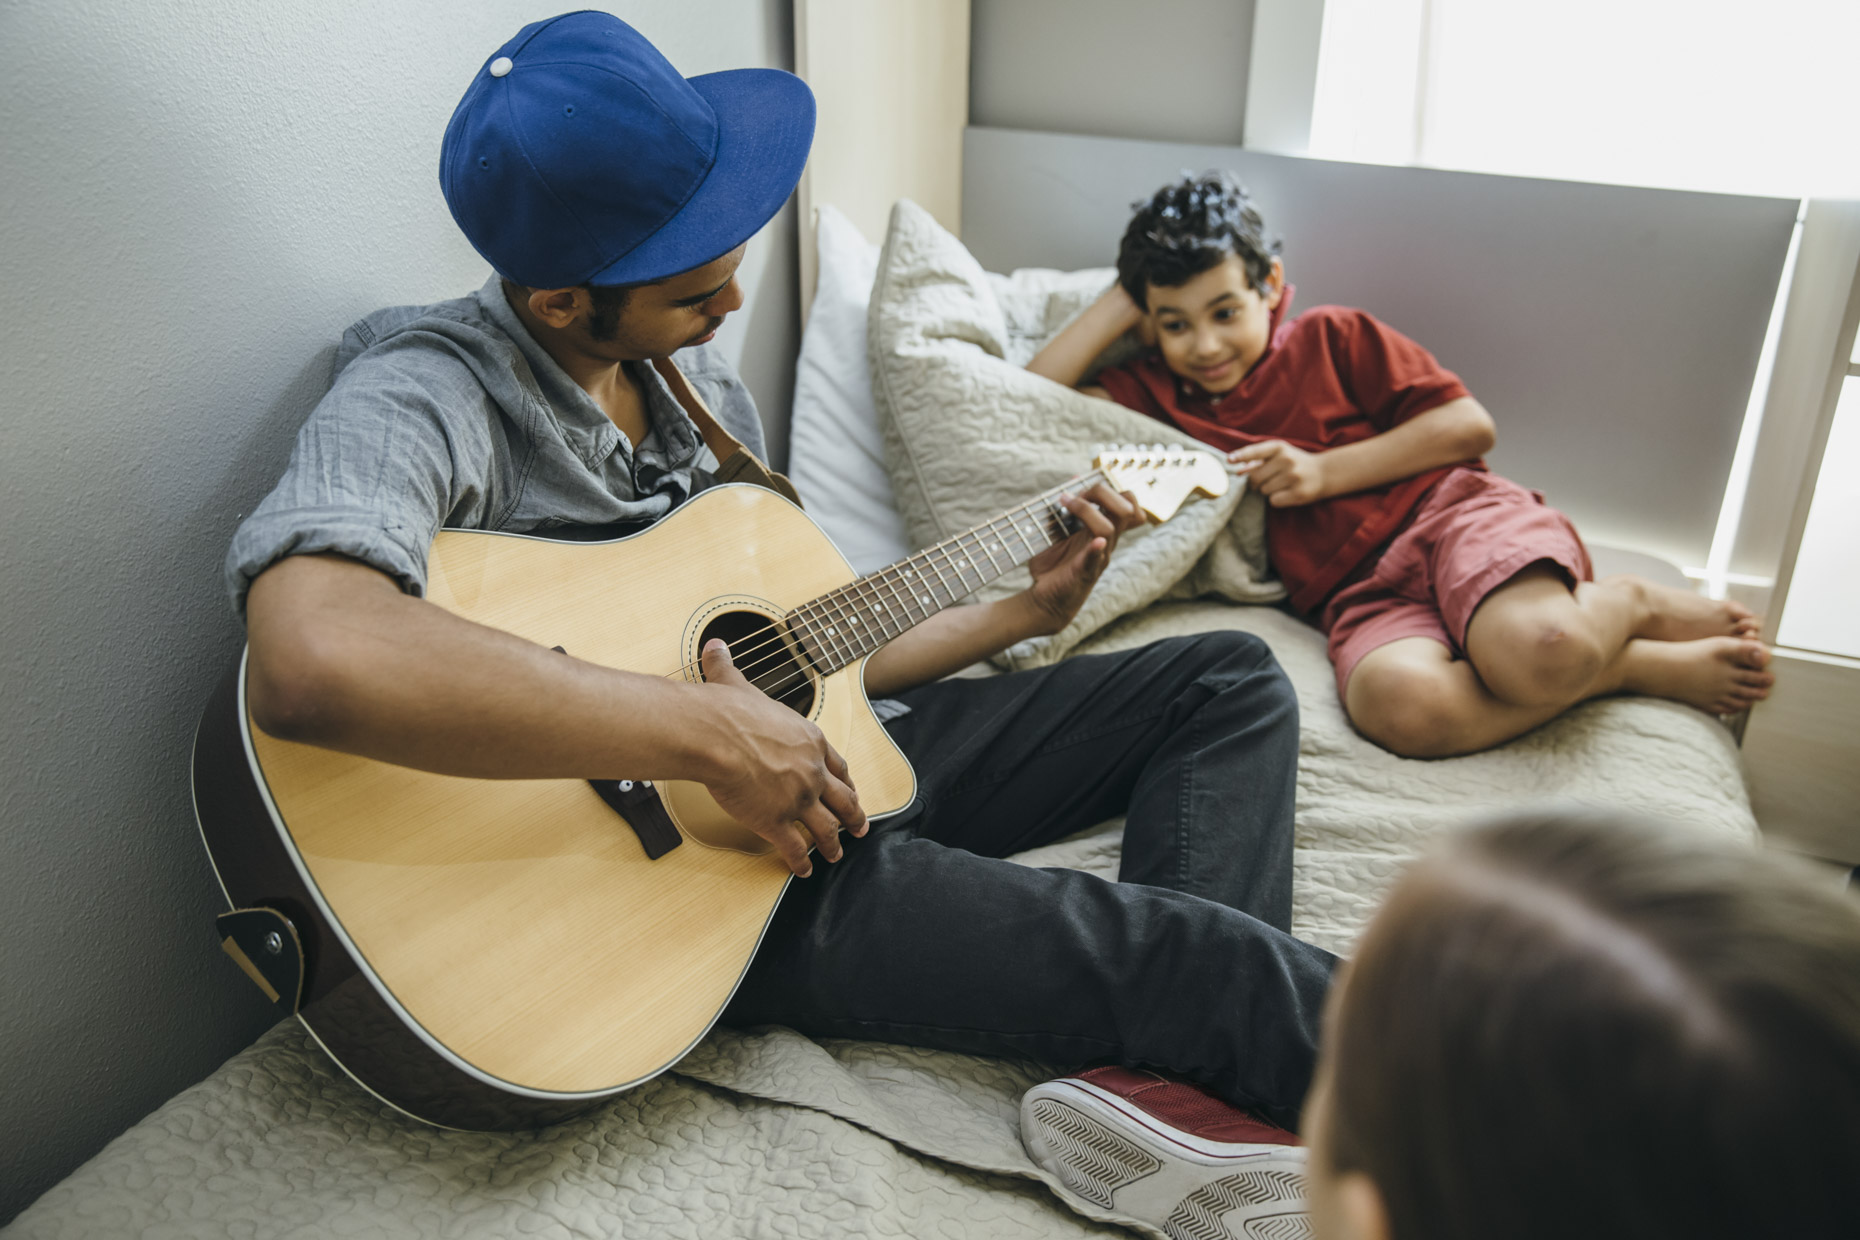 Teen boy on bed playing guitar for brother and sister